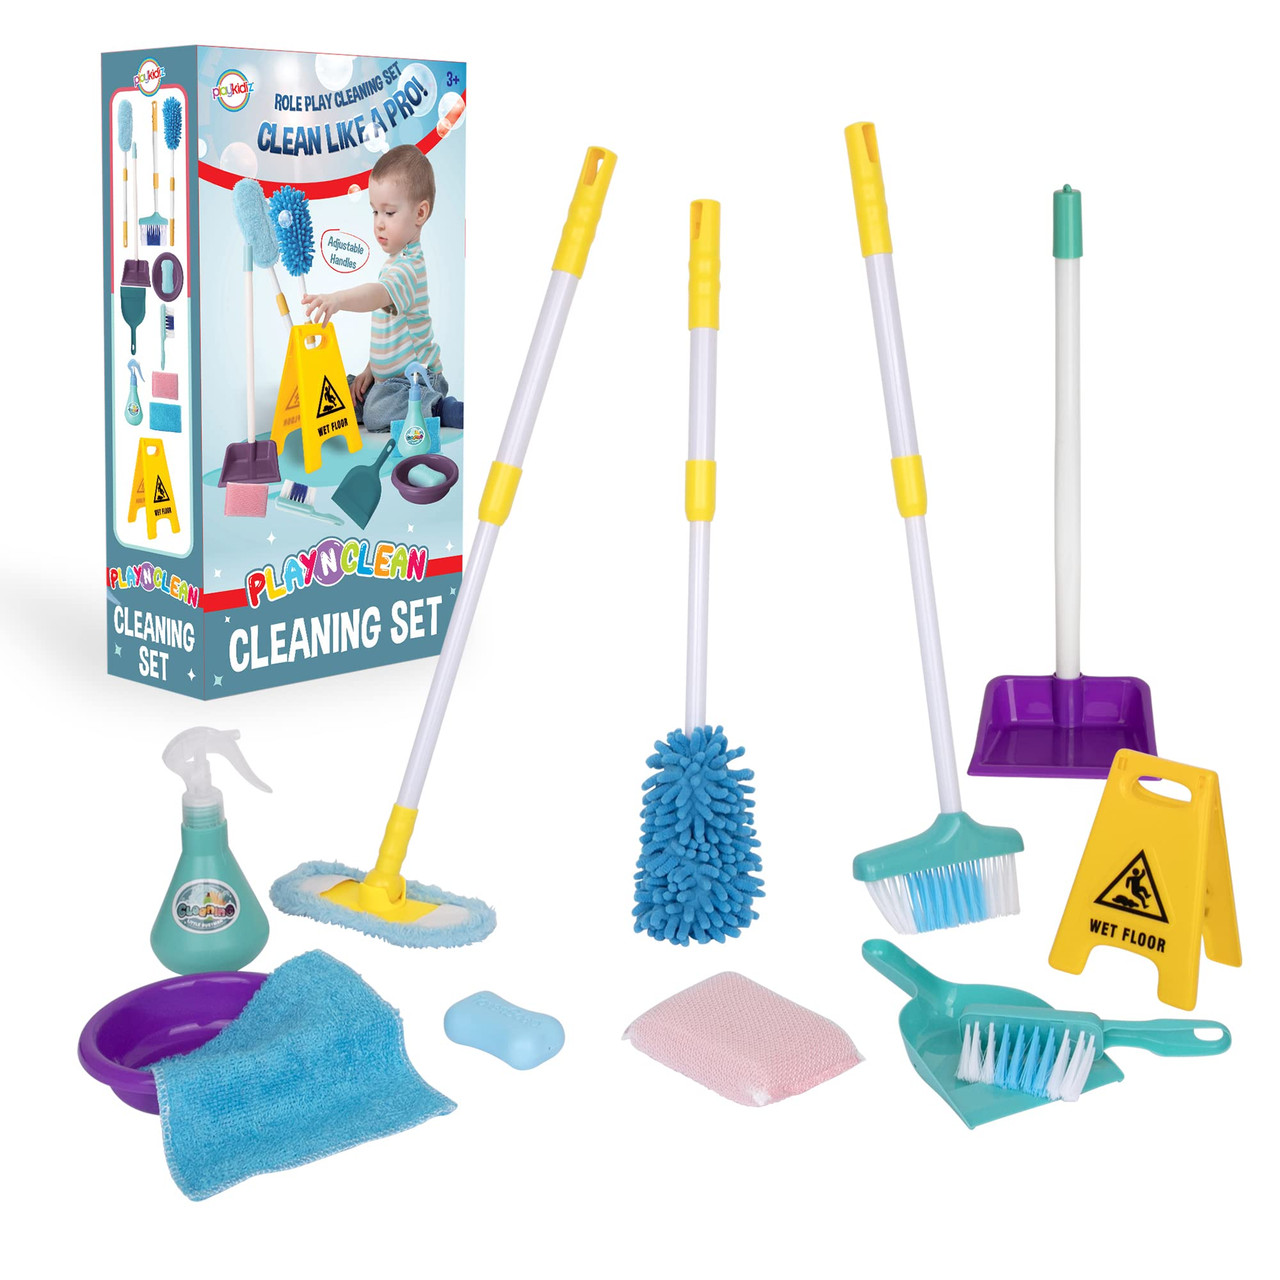 Children's Play House Cleaning Toys Clean Up Sweeping Mop Automatic Sweeper  Early Education Learn Housework Cleaning Tool Set